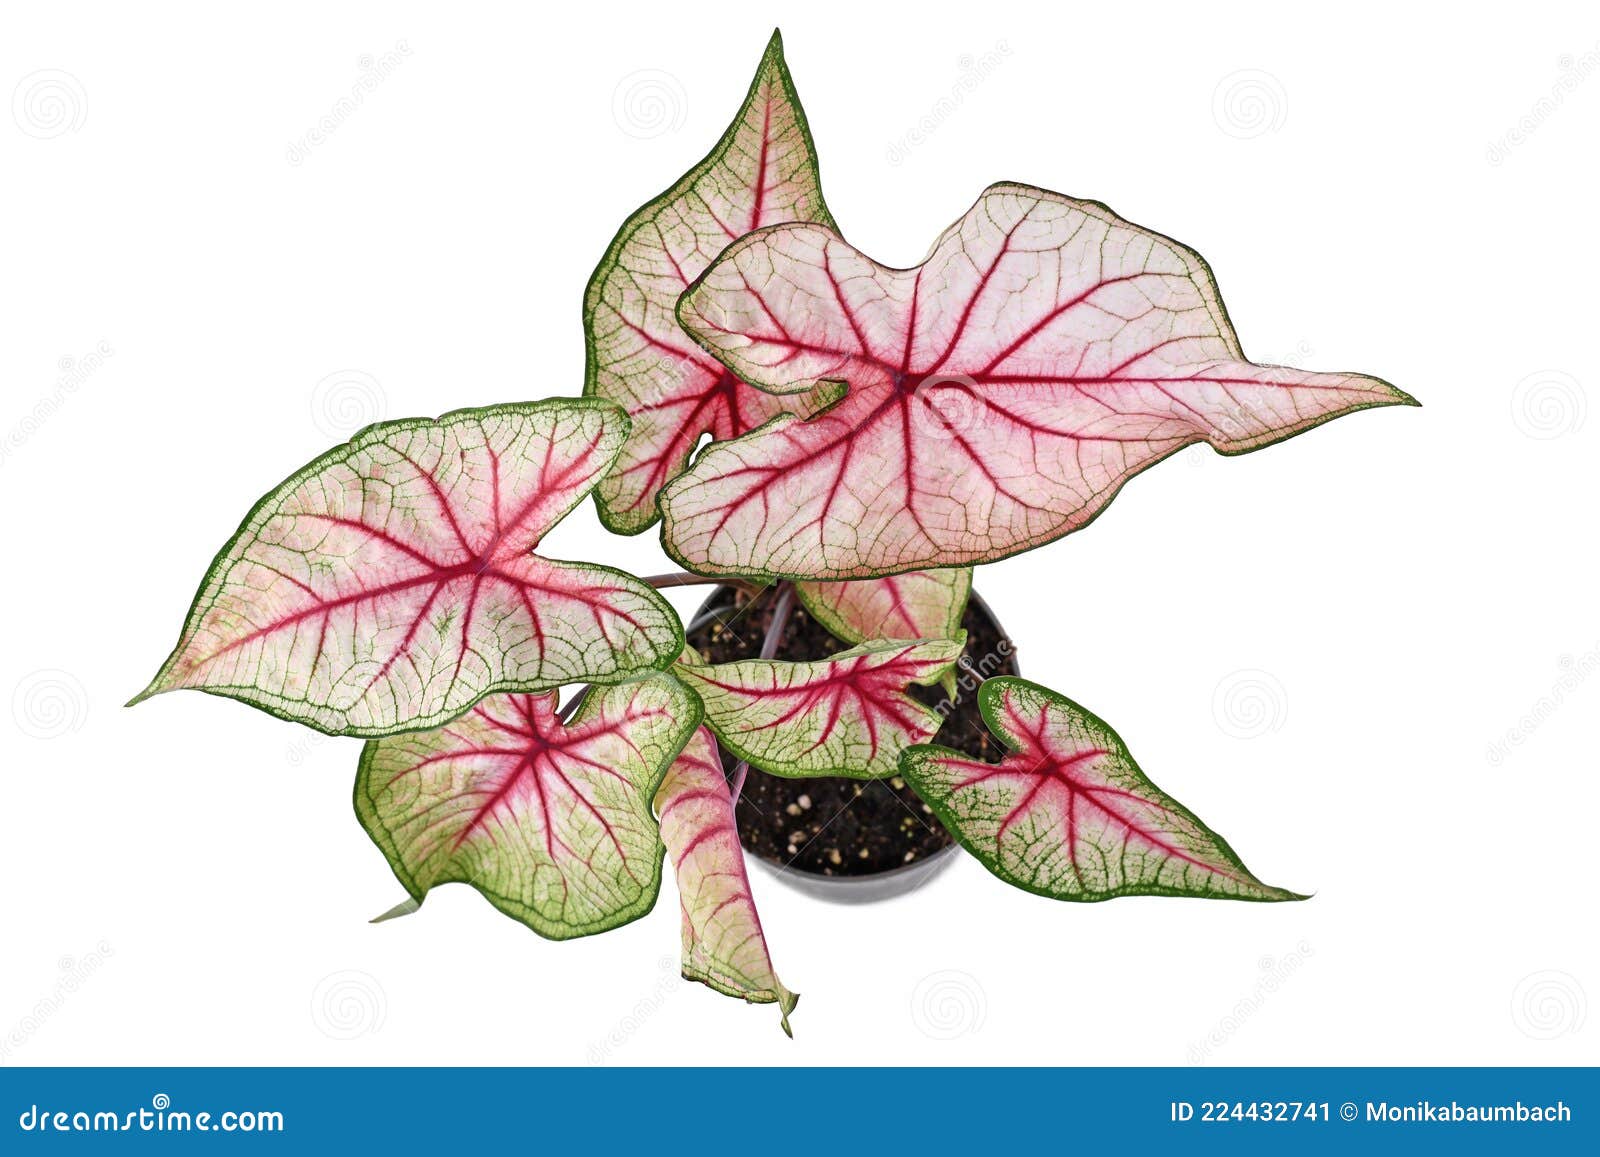 Top View of Exotic `Caladium White Queen` Plant with White Leaves and ...